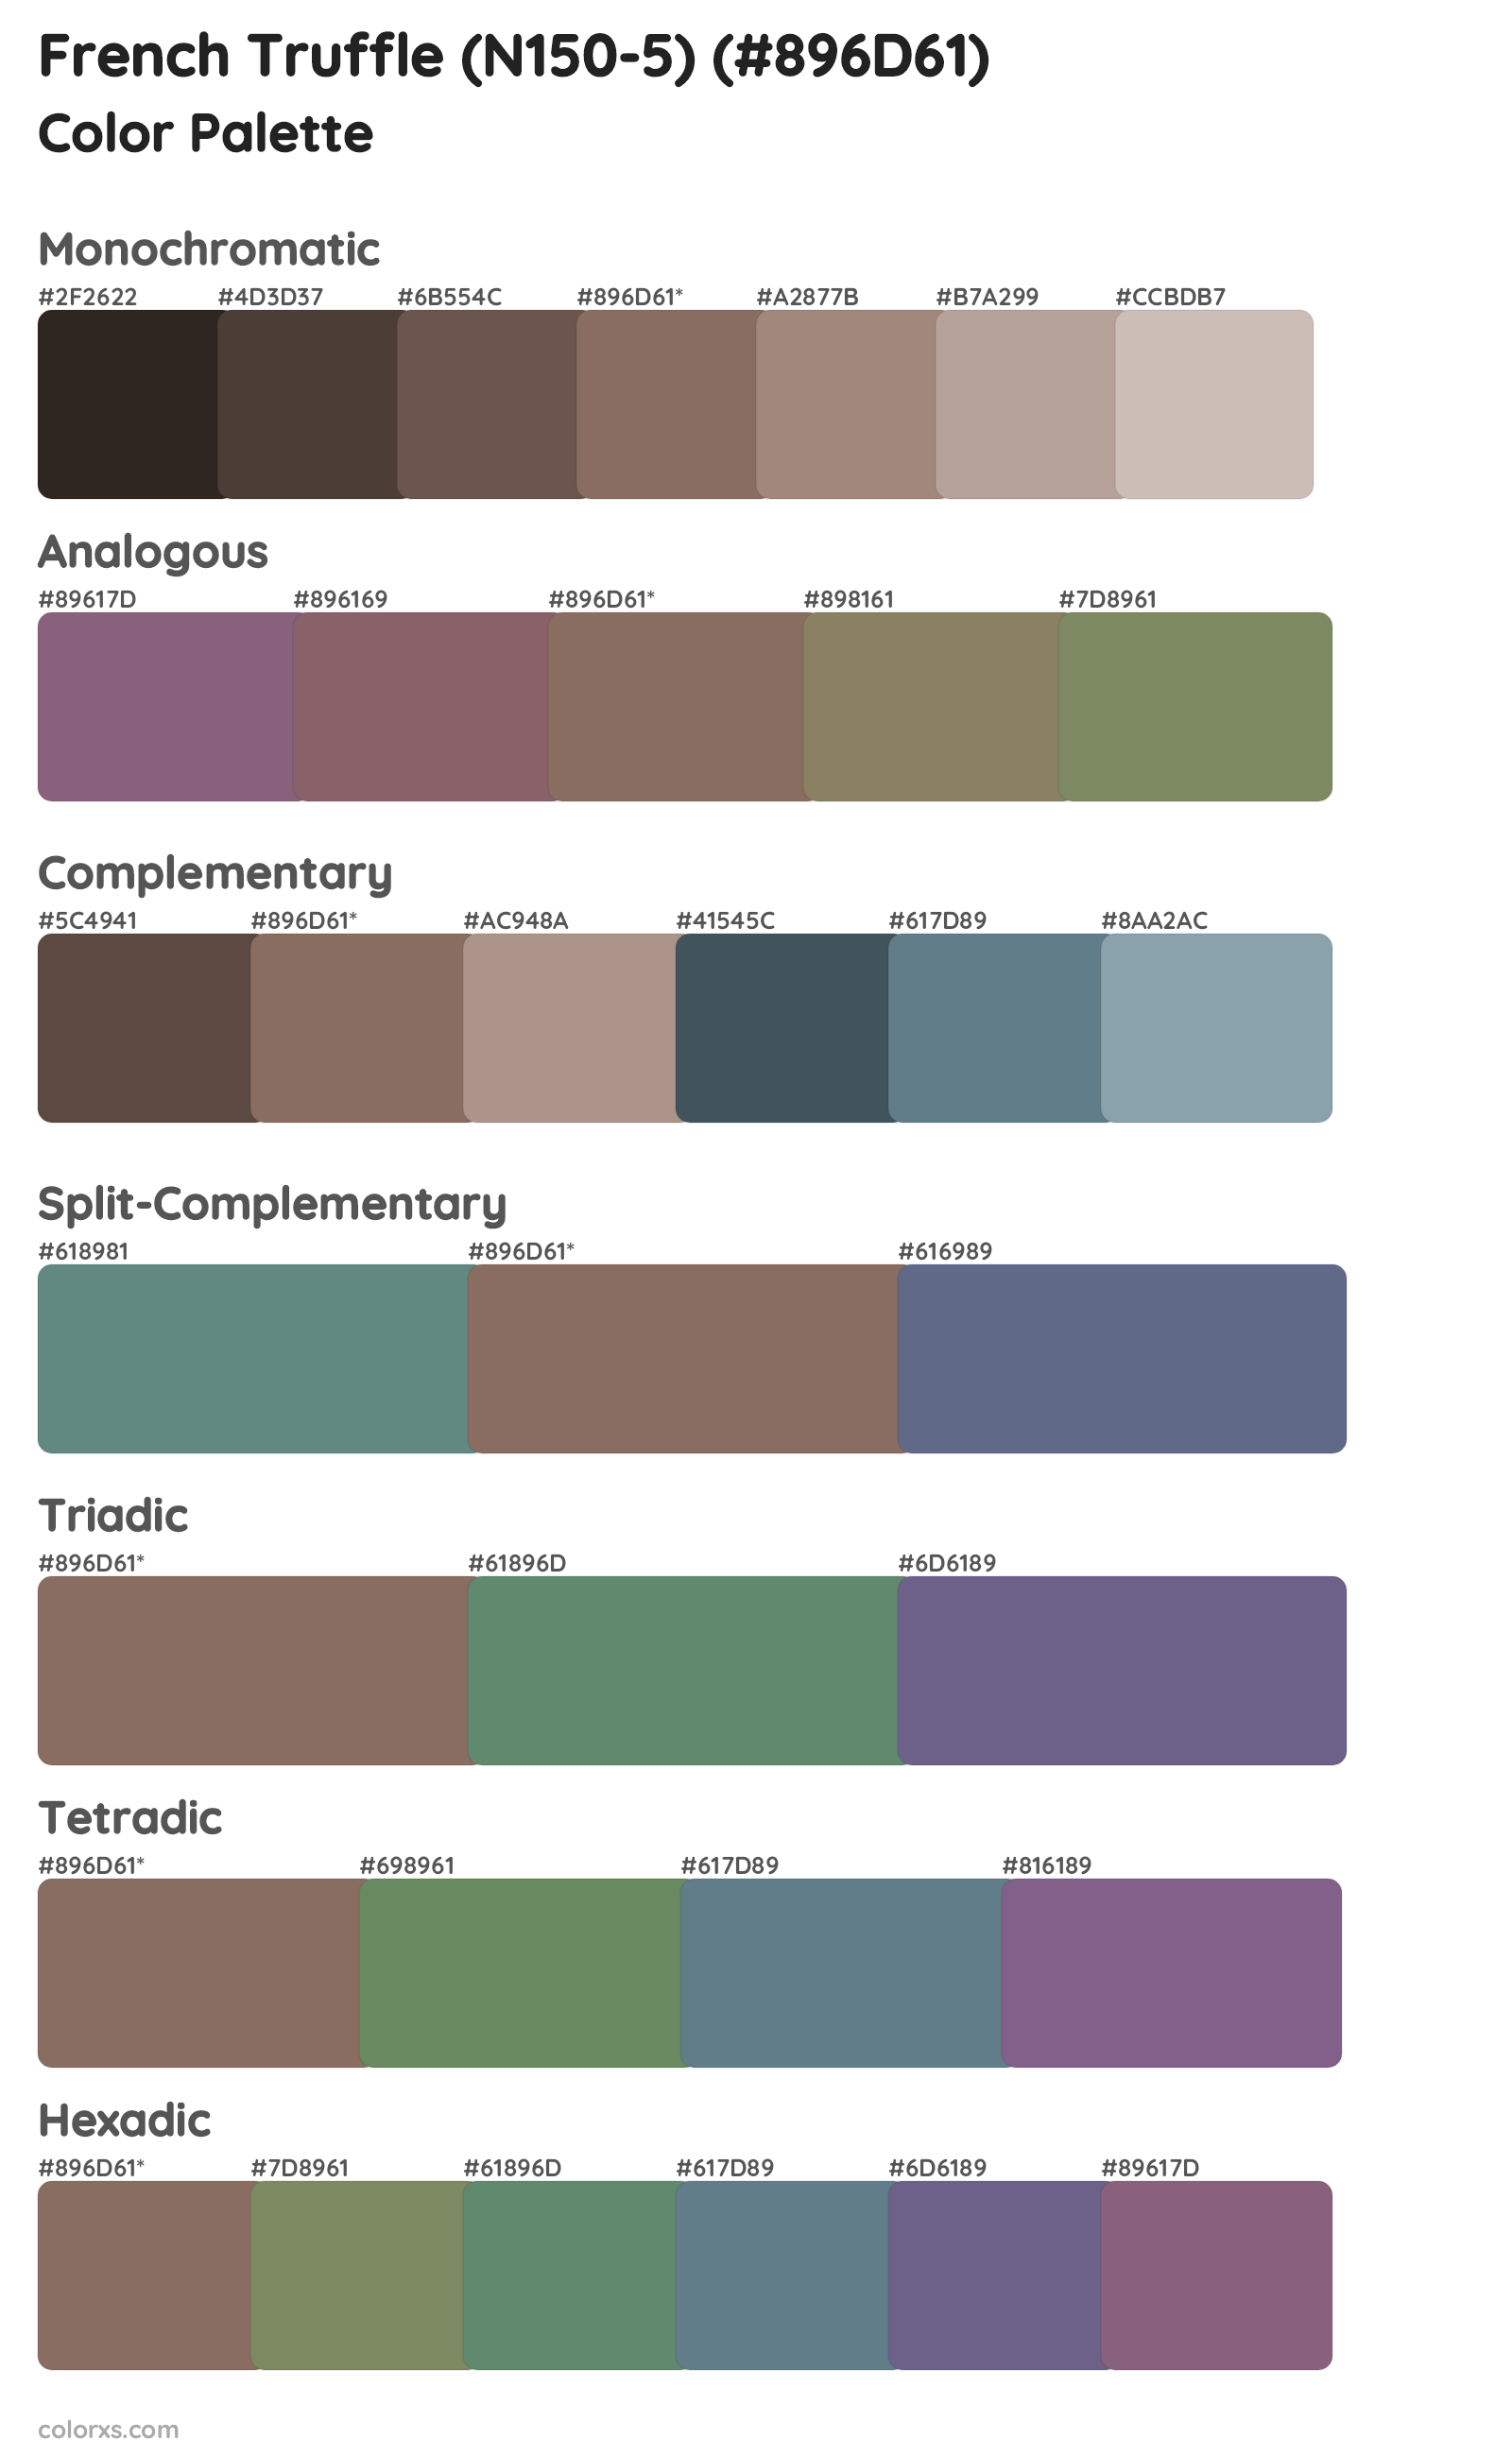 French Truffle (N150-5) Color Scheme Palettes